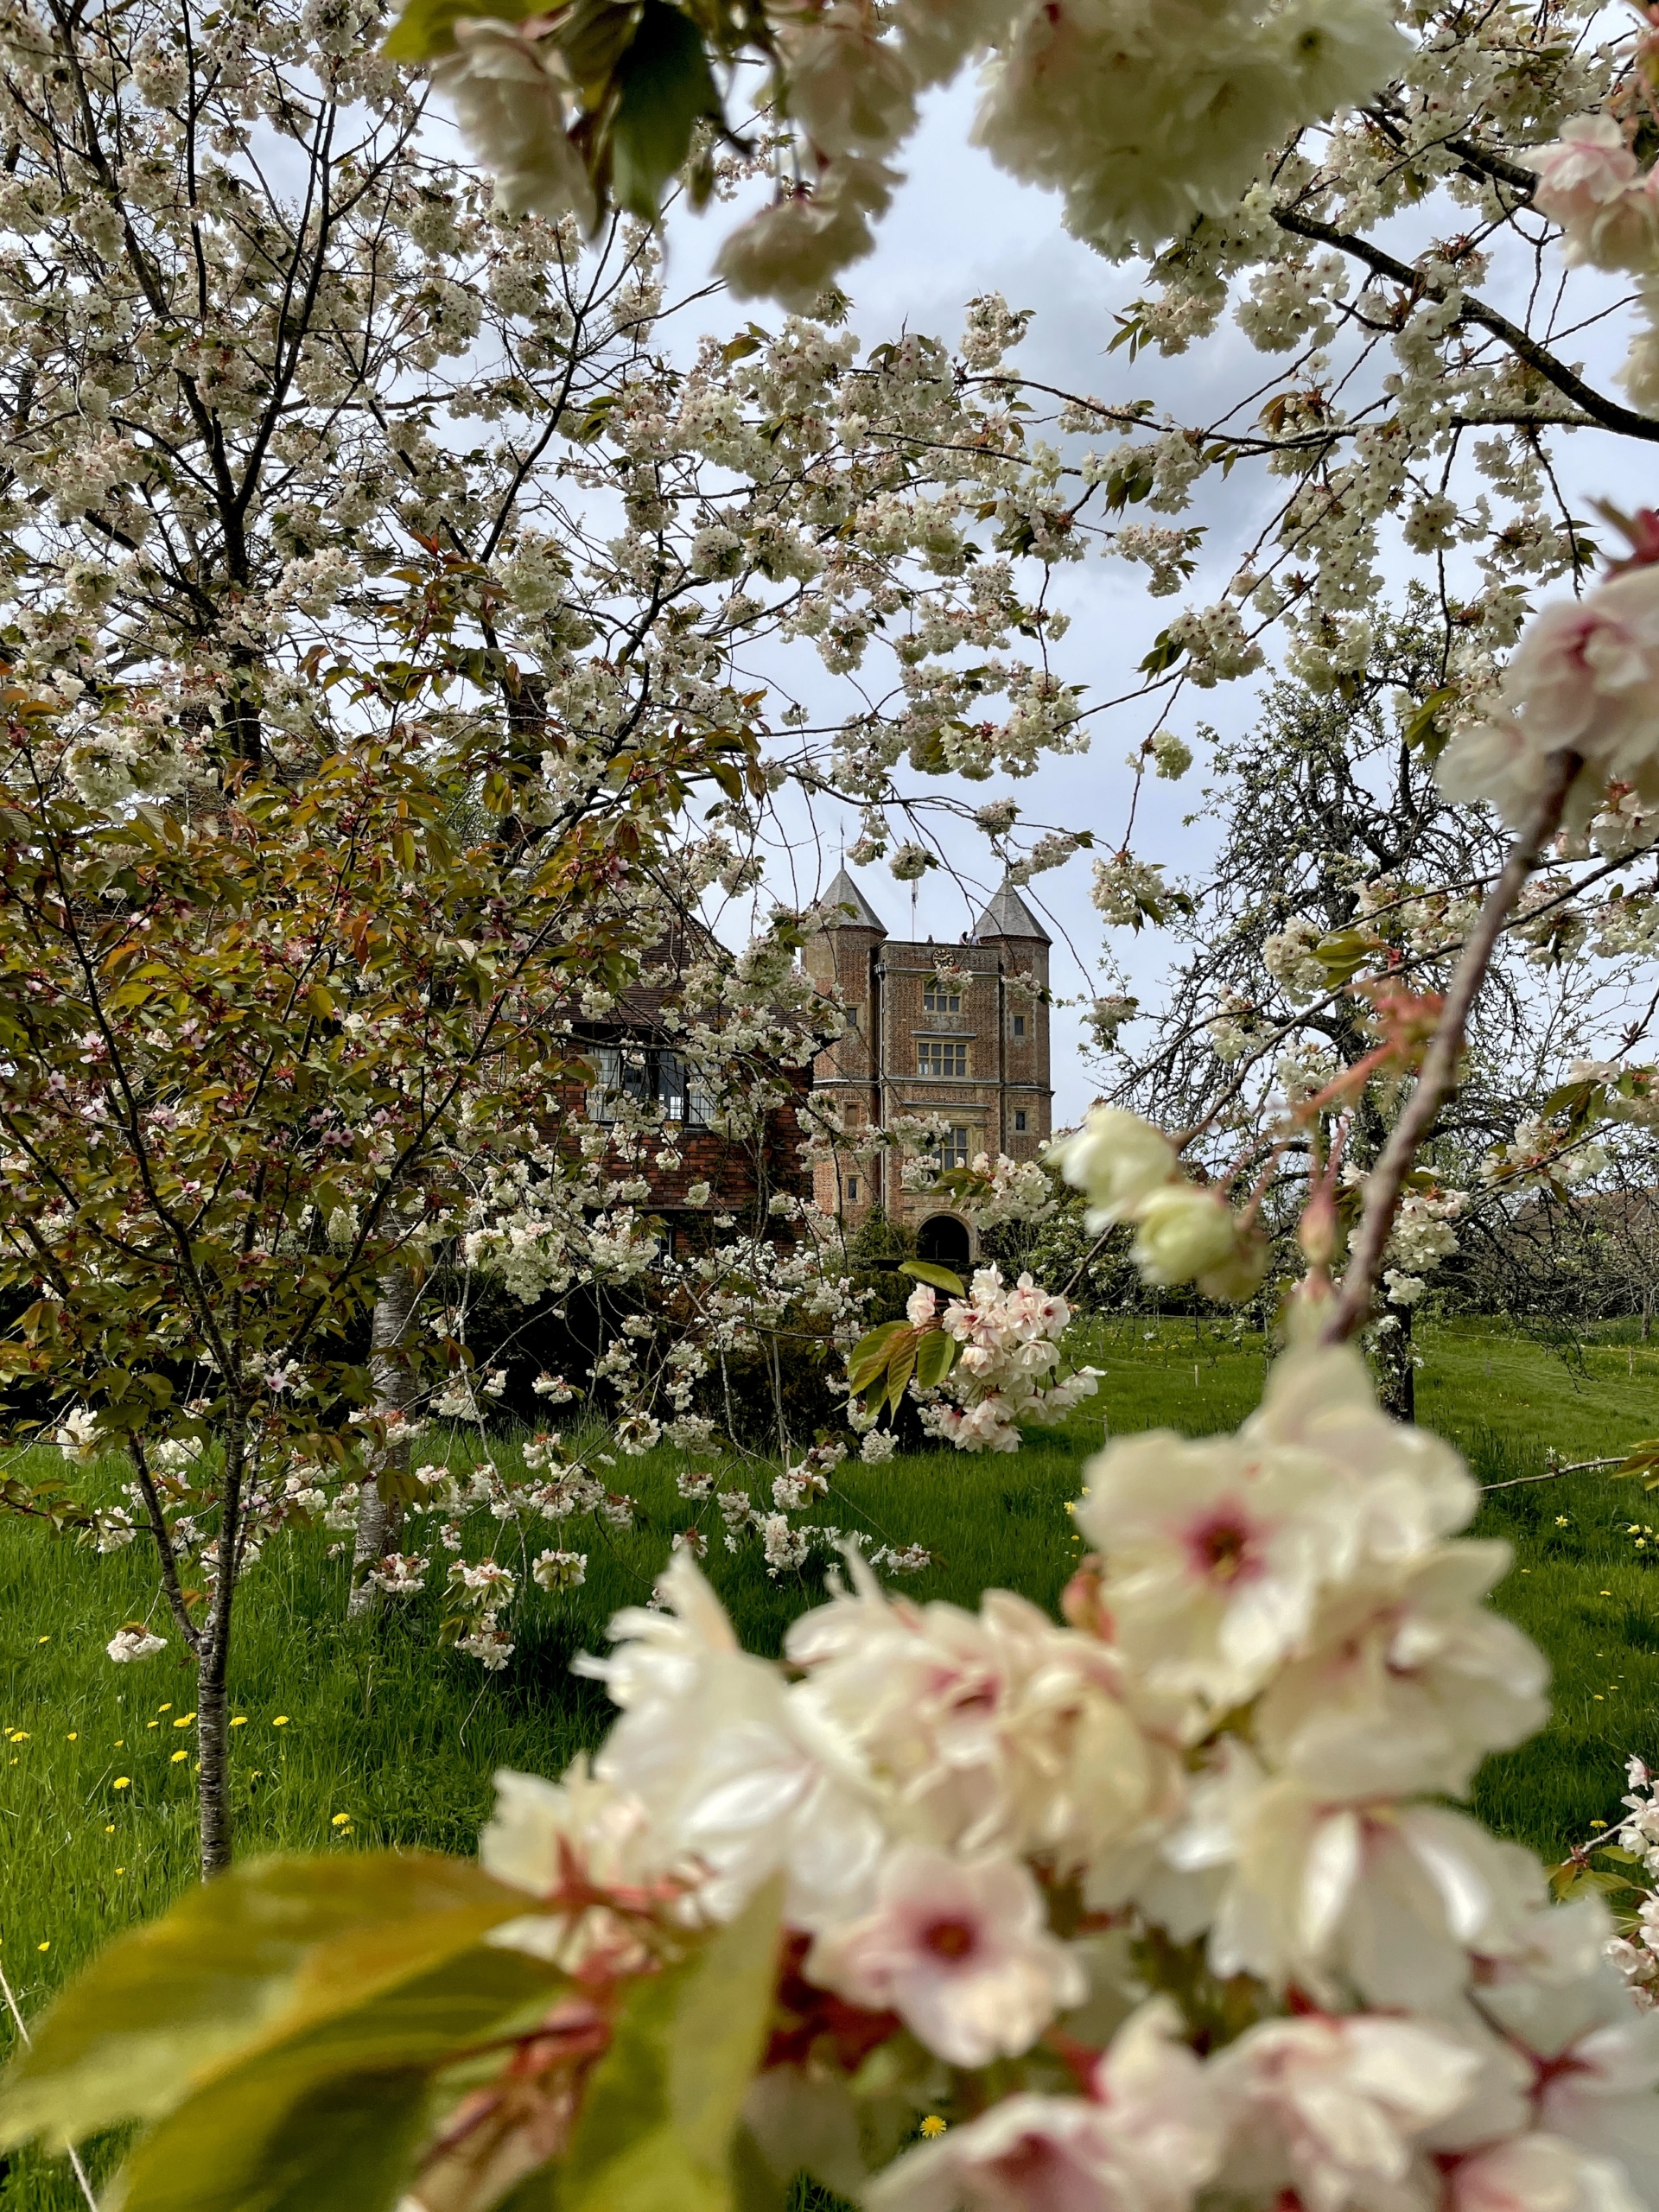 Spending the Afternoon at Sissinghurst Castle Garden in the Spring